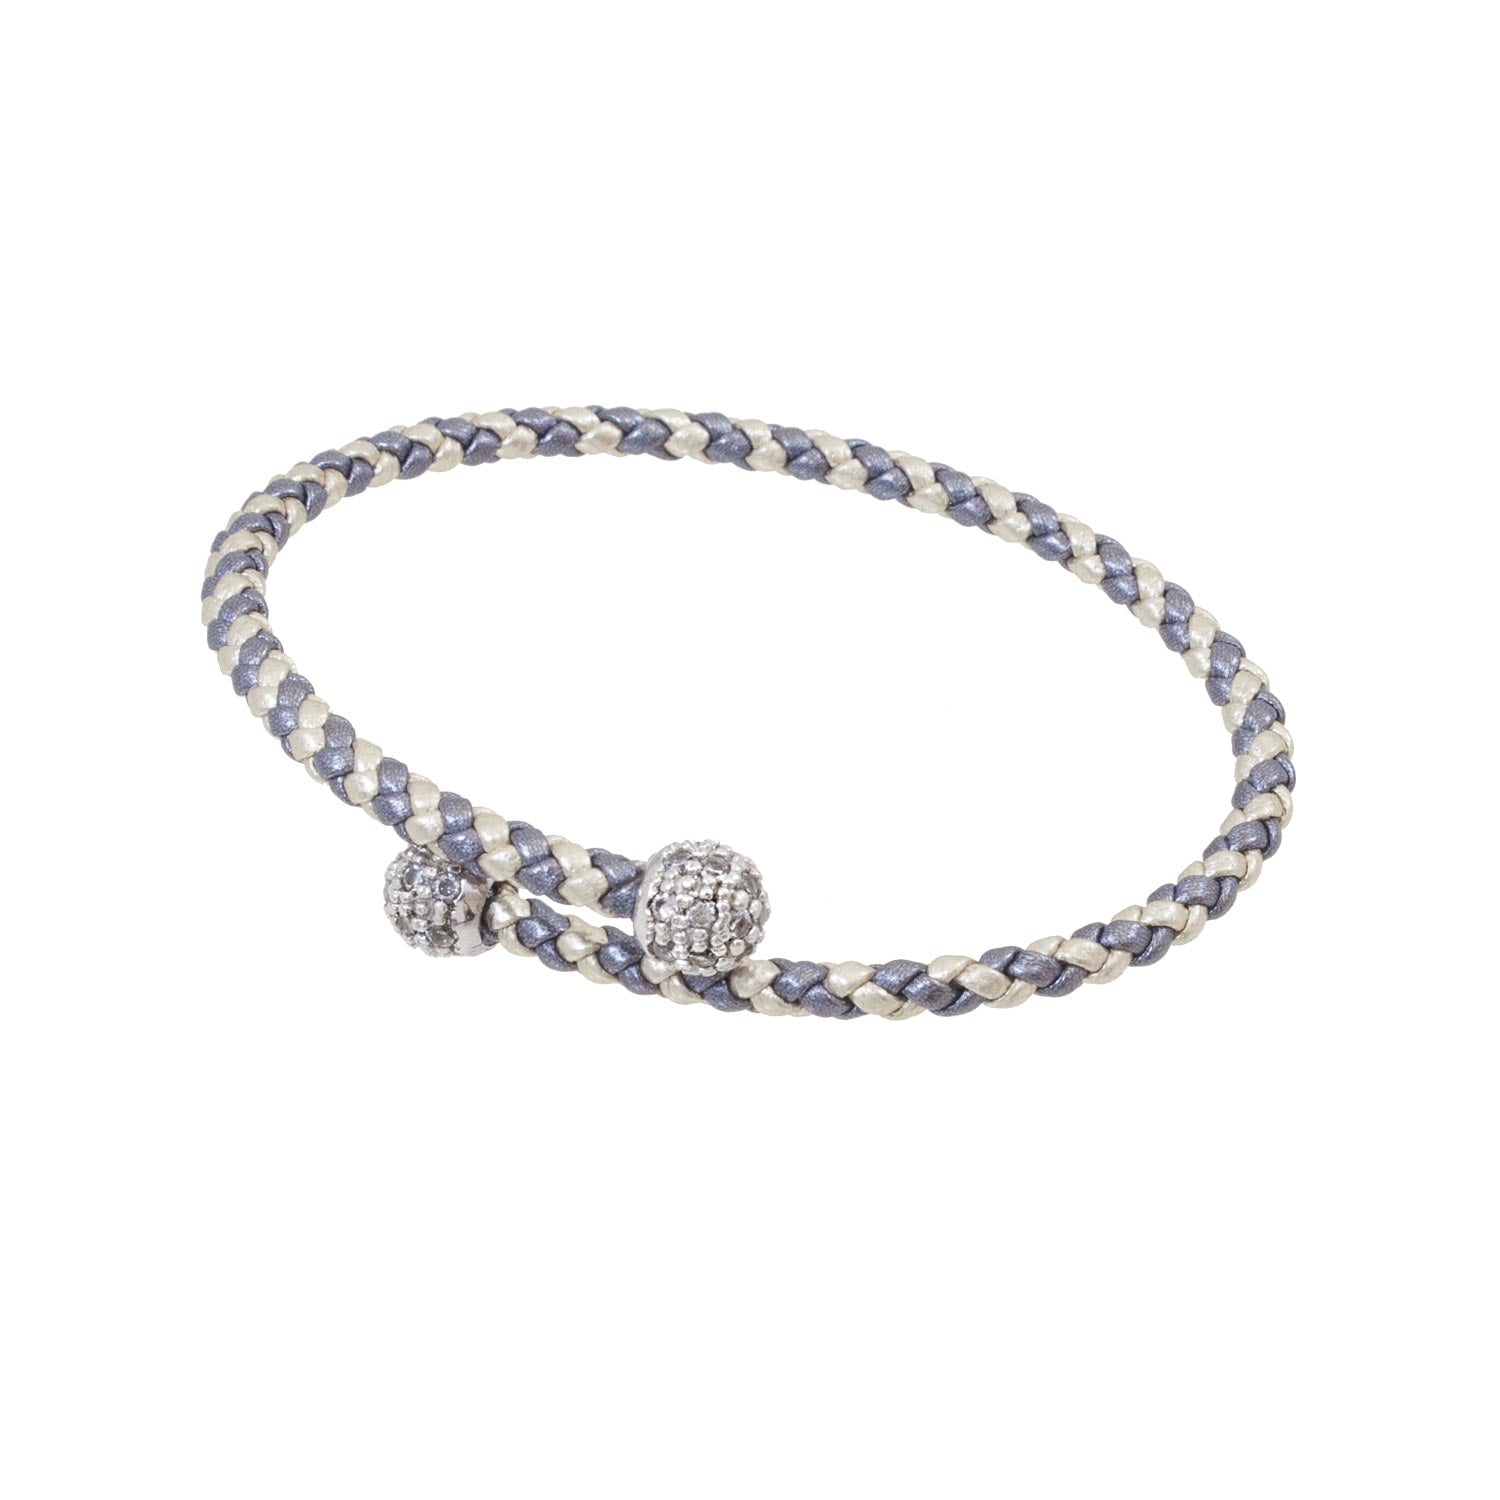 Serena Bracelet in Genuine Scoubidou Semi-Rigid Leather with Crystals for Women